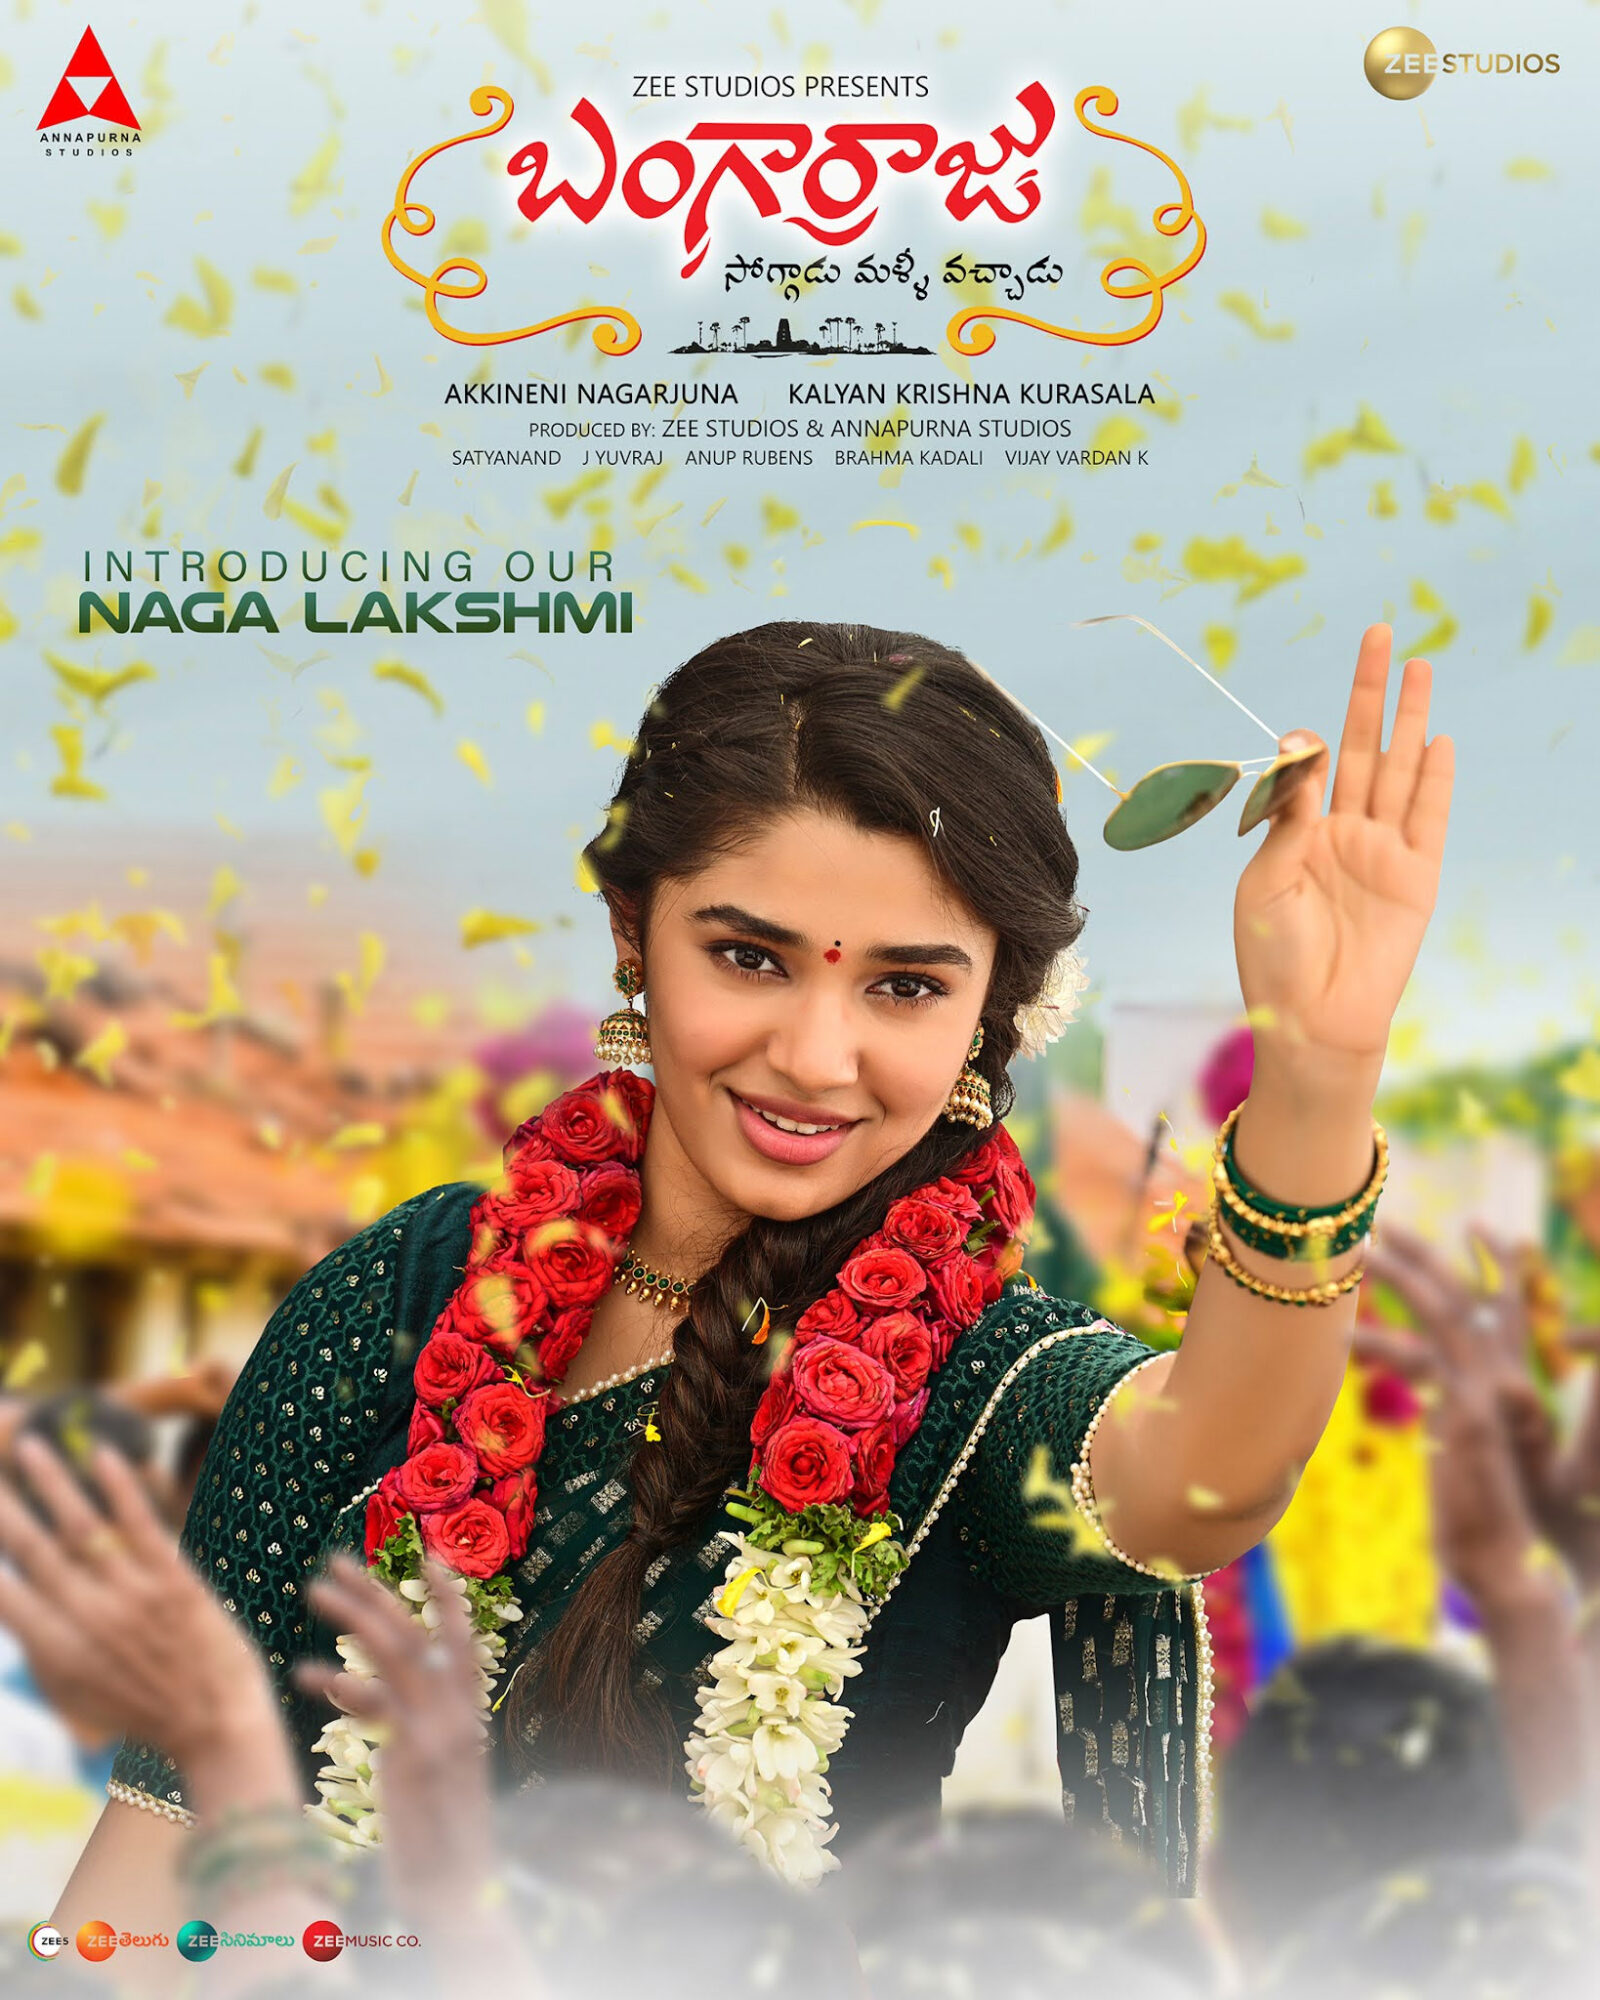 Krithi Shetty in Bangarraju first look poster